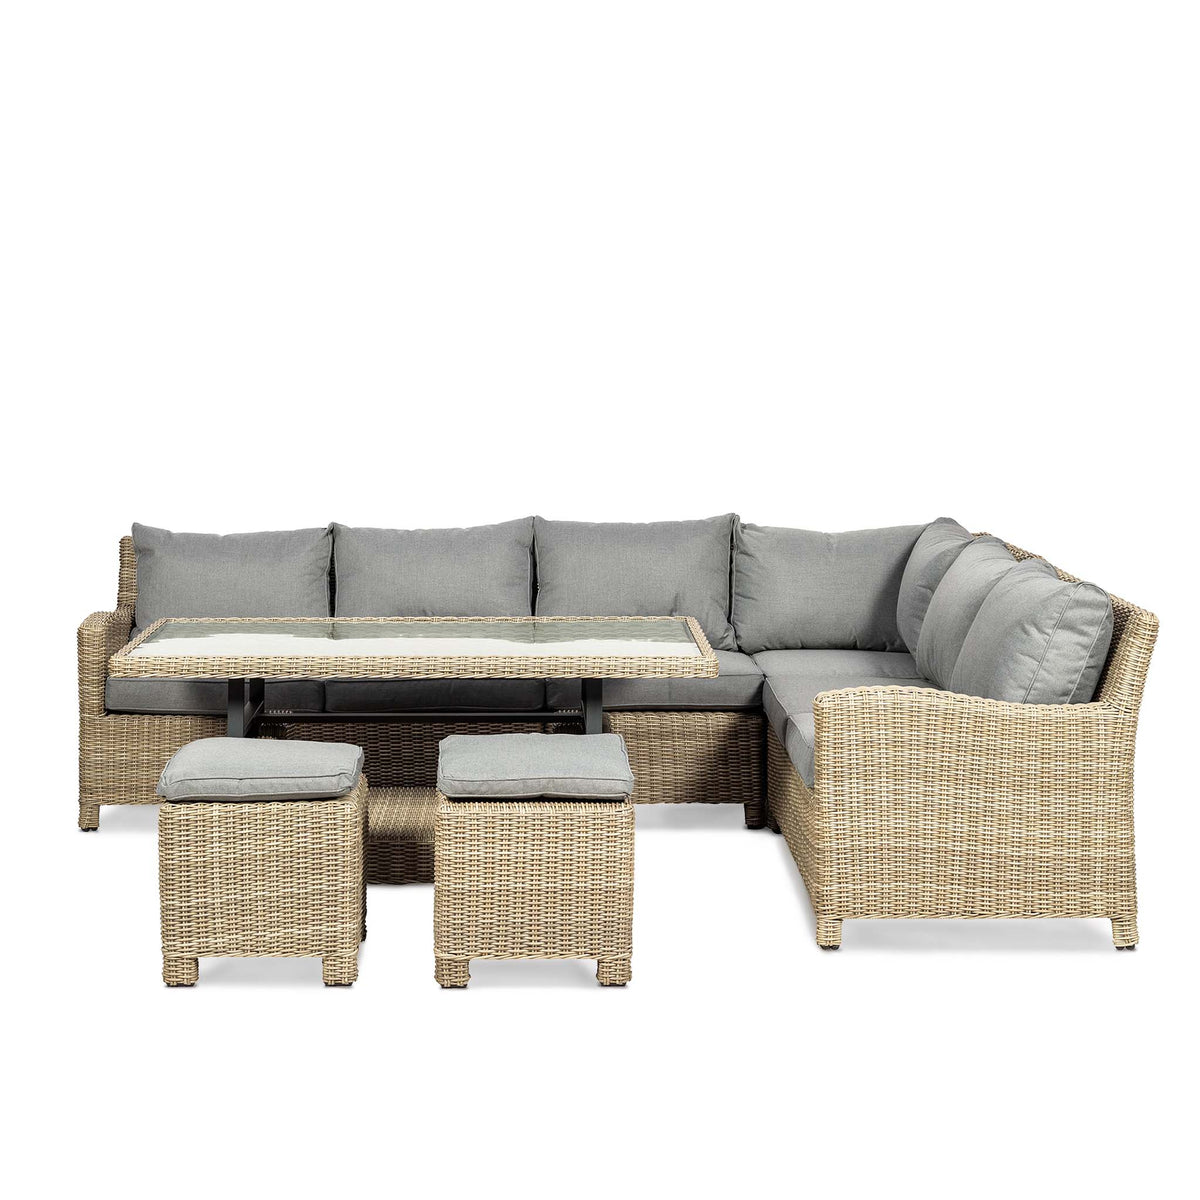 Wentworth Deluxe Rattan Corner Sofa Garden Lounge Set with Adjustable Table - With Table fully up